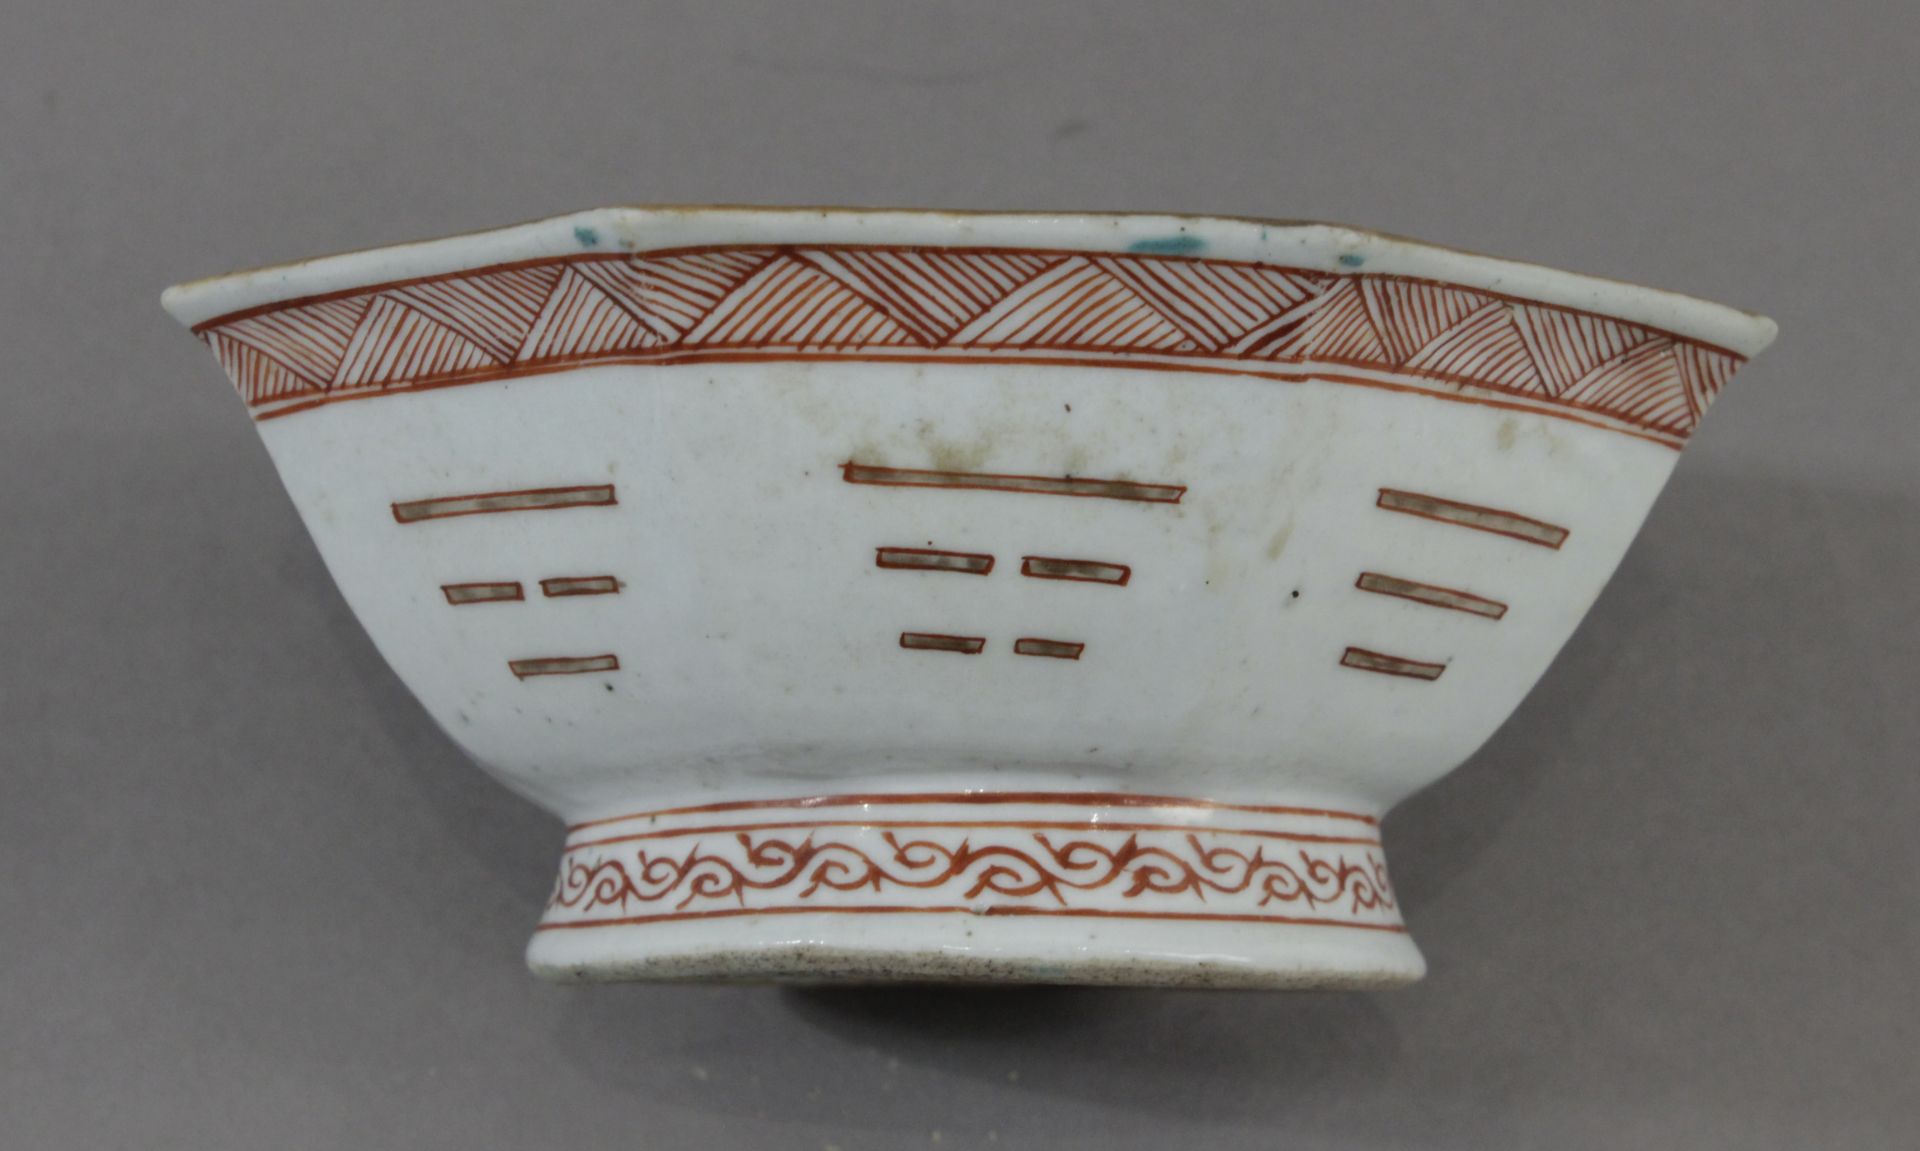 A late 19th century Chinese fruit bowl in celadon porcelain from Qing dynasty period - Bild 2 aus 4